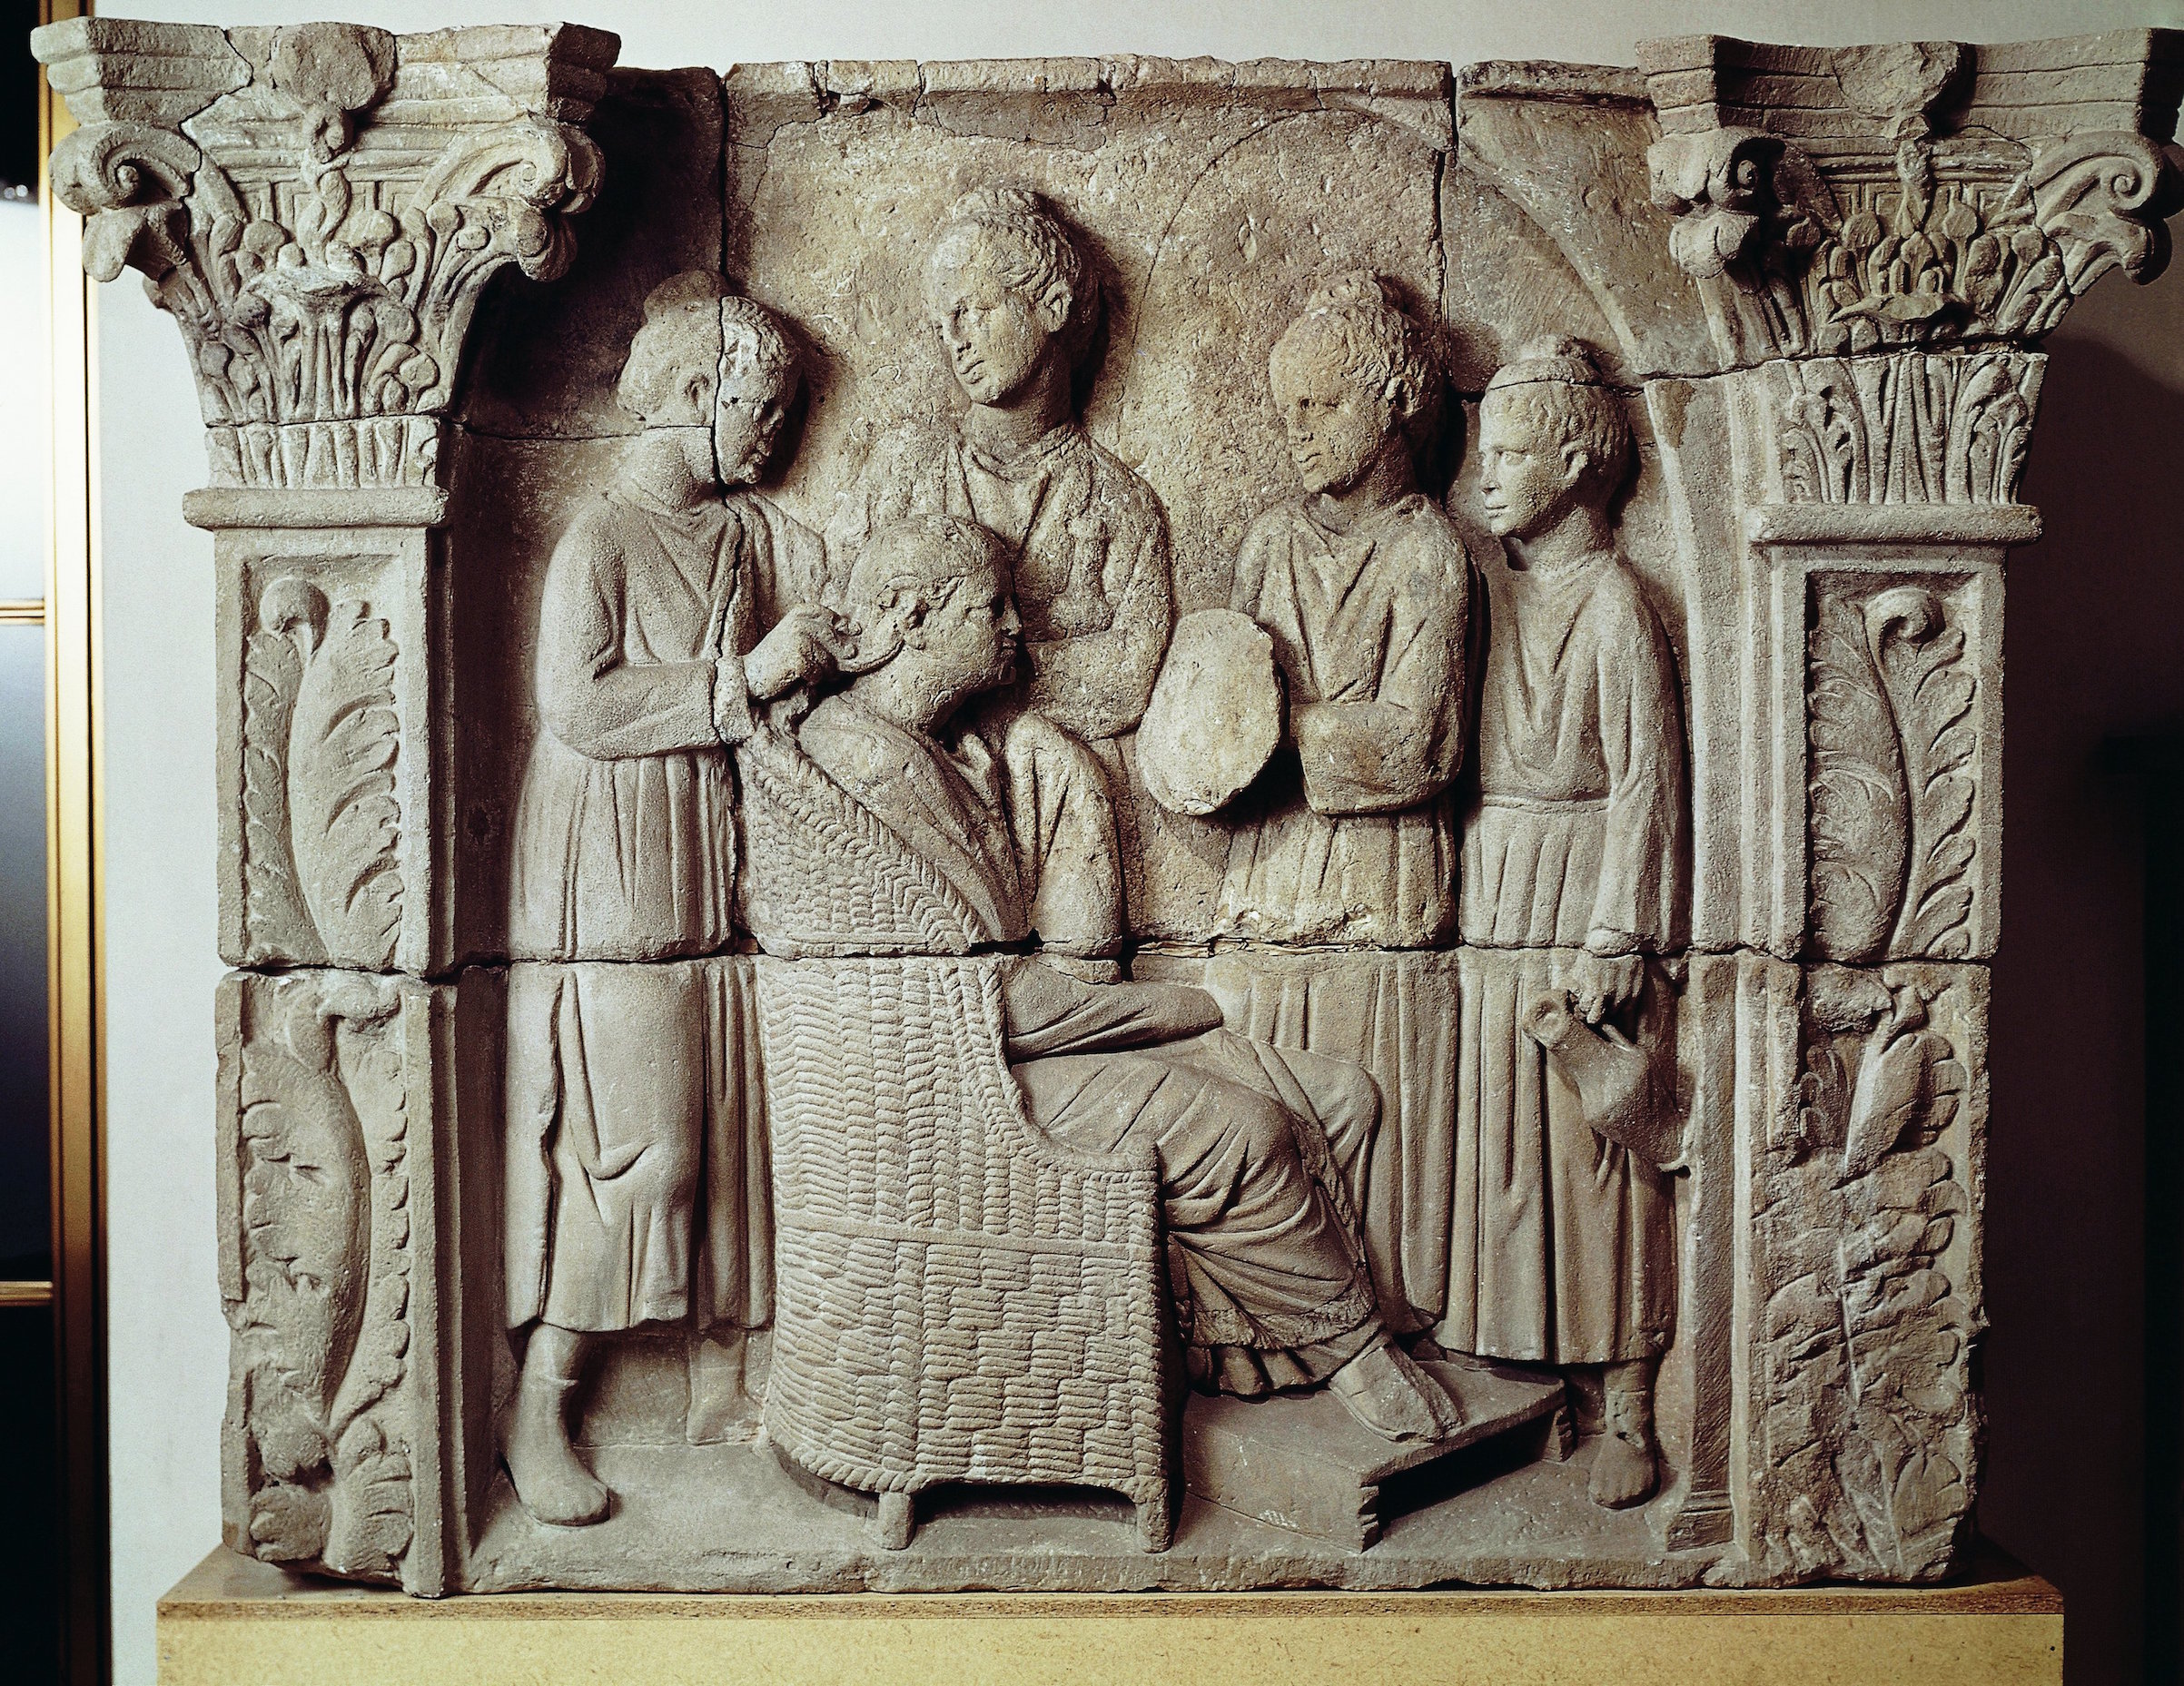 Second century A.D. Roman relief portraying a lady having her hair styled. From Neumagen-Dhron, Germany. (DEA / A. DAGLI ORTI / De Agostini / Getty Images)